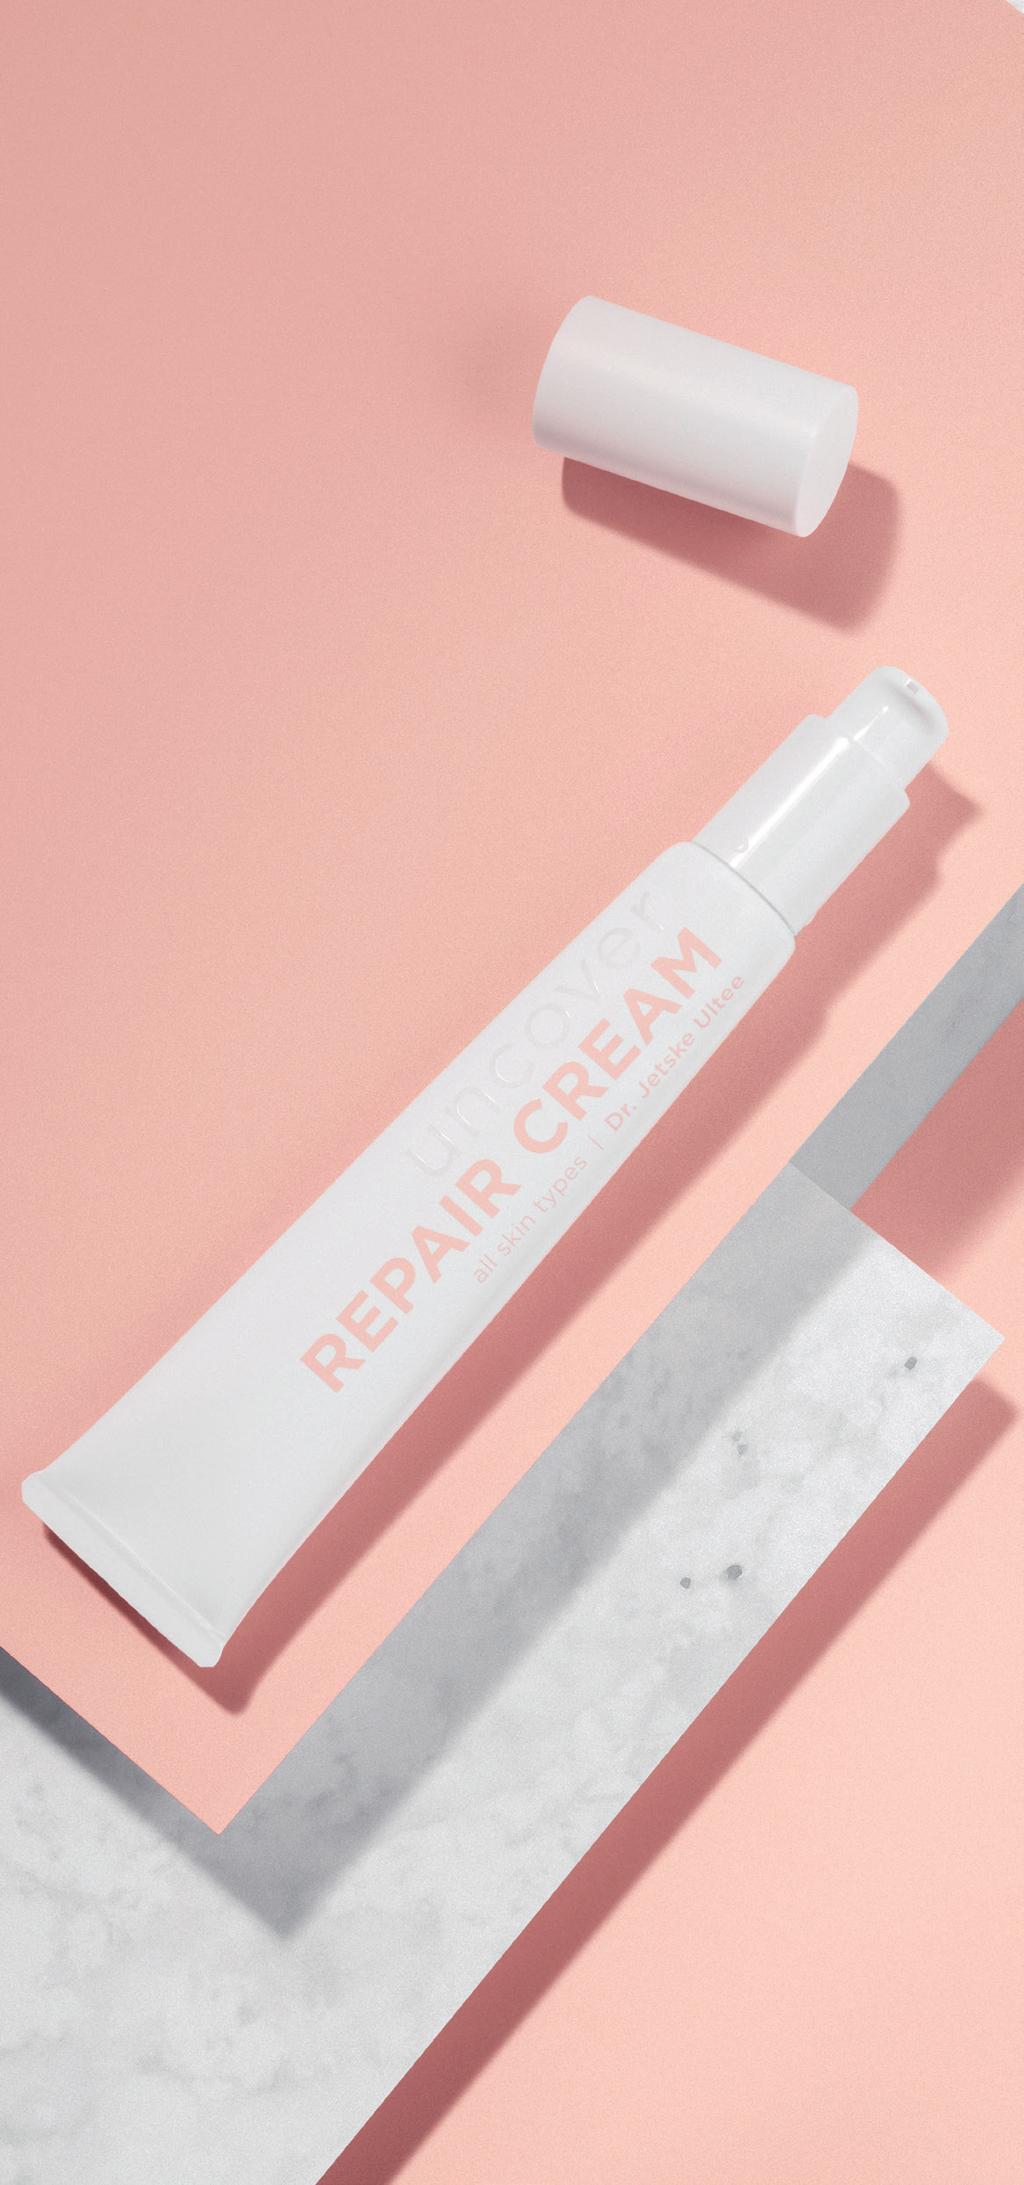 REPAIR CREAM NEW First aid for dry and sensitive skin Extra rich, full creame Restores the skin barrier Soothes and protects dryness and irritation Unique combination of skin s own lipids With oat